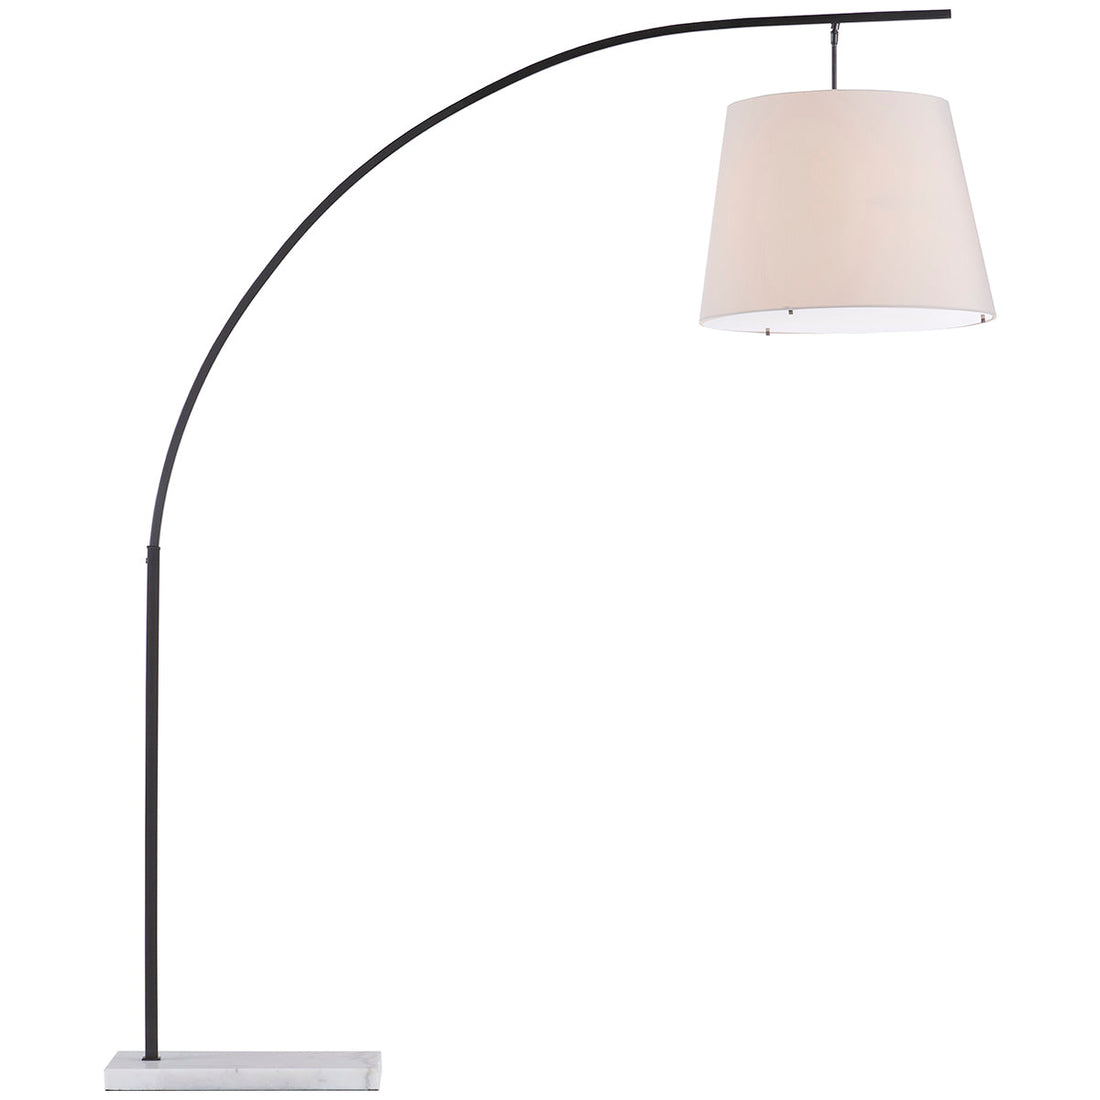 Currey and Company Cloister Large Floor Lamp